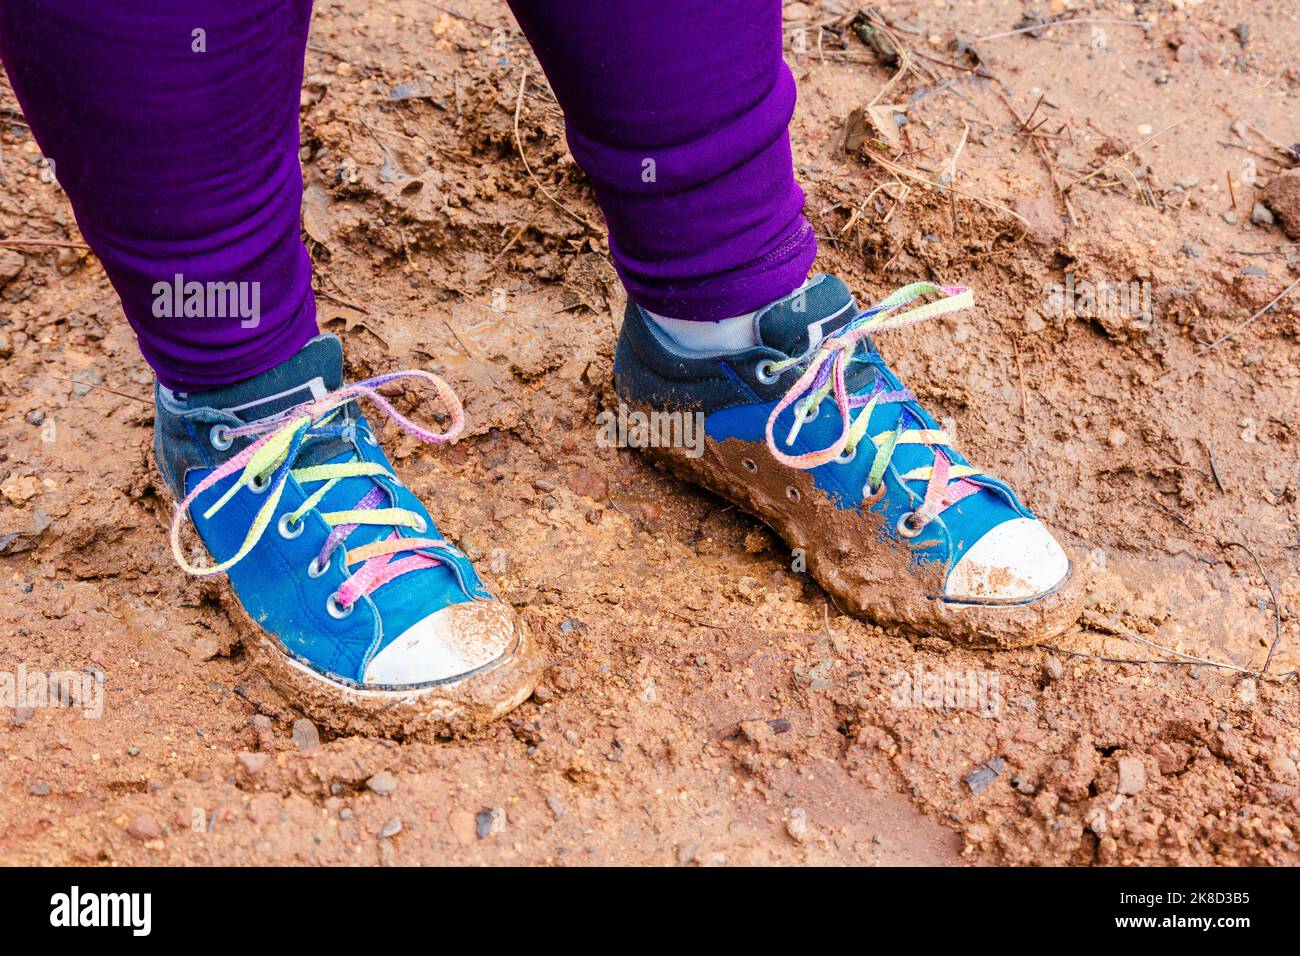 A young girl with colorful muddy shoes from playing outside. Stock Photo